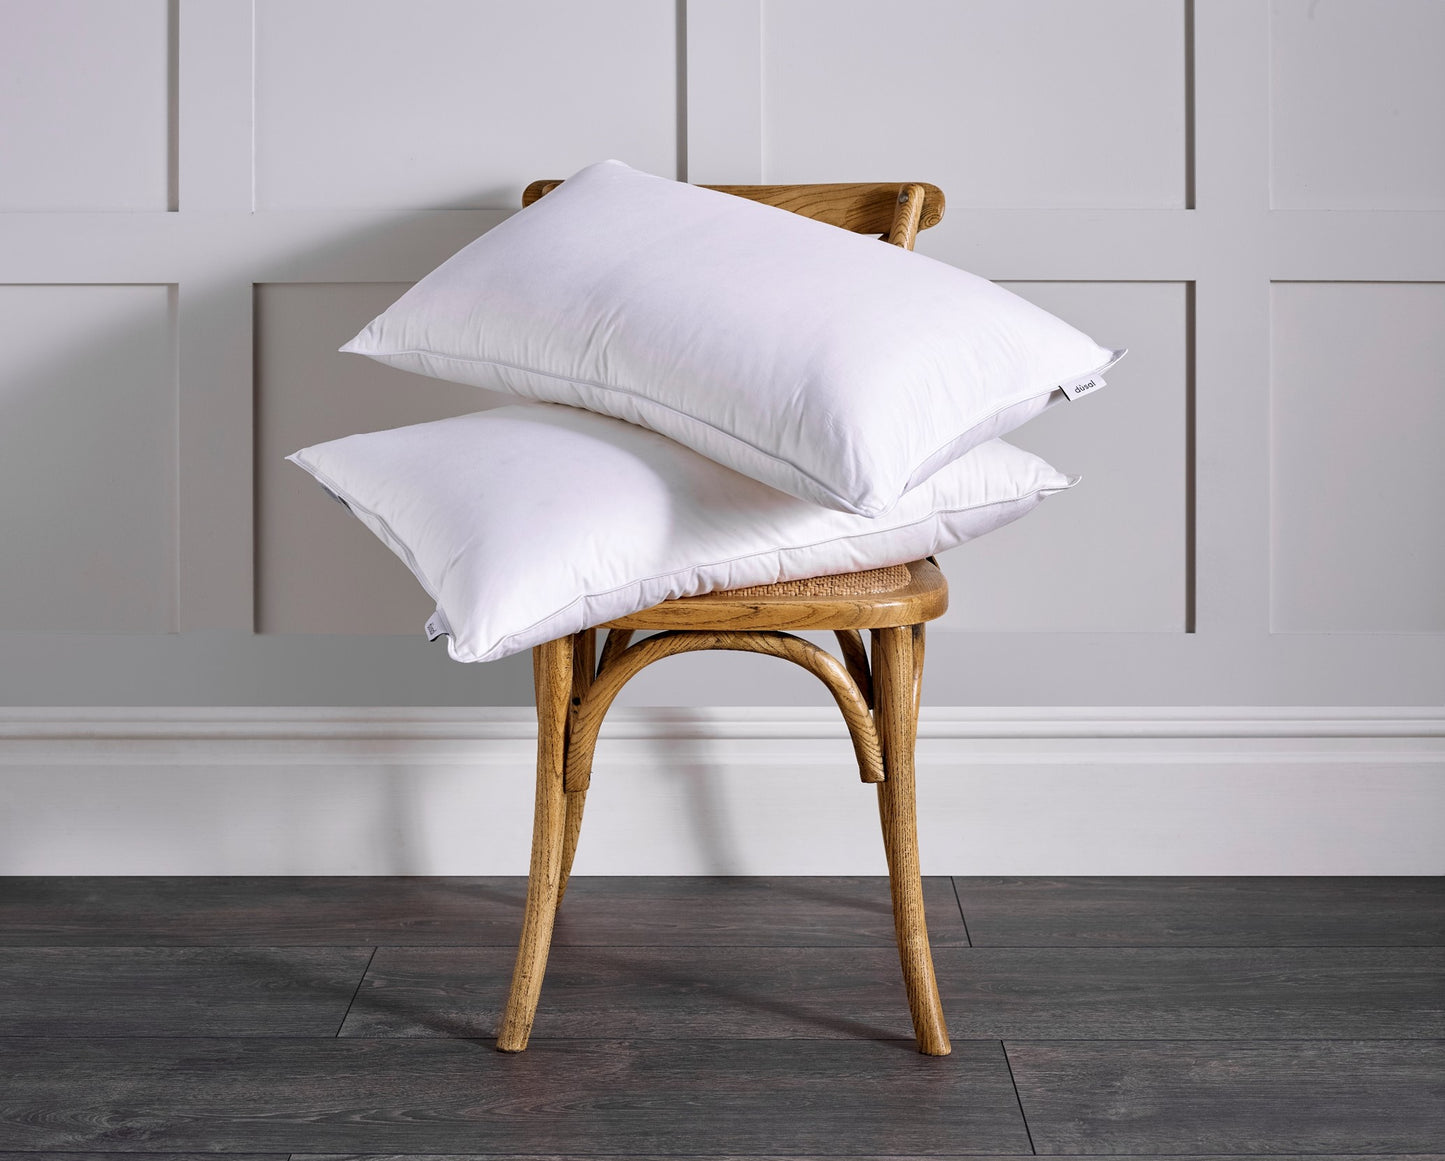 Luxury 100% European Duck Down Pillow With 233TC Cotton Cover.